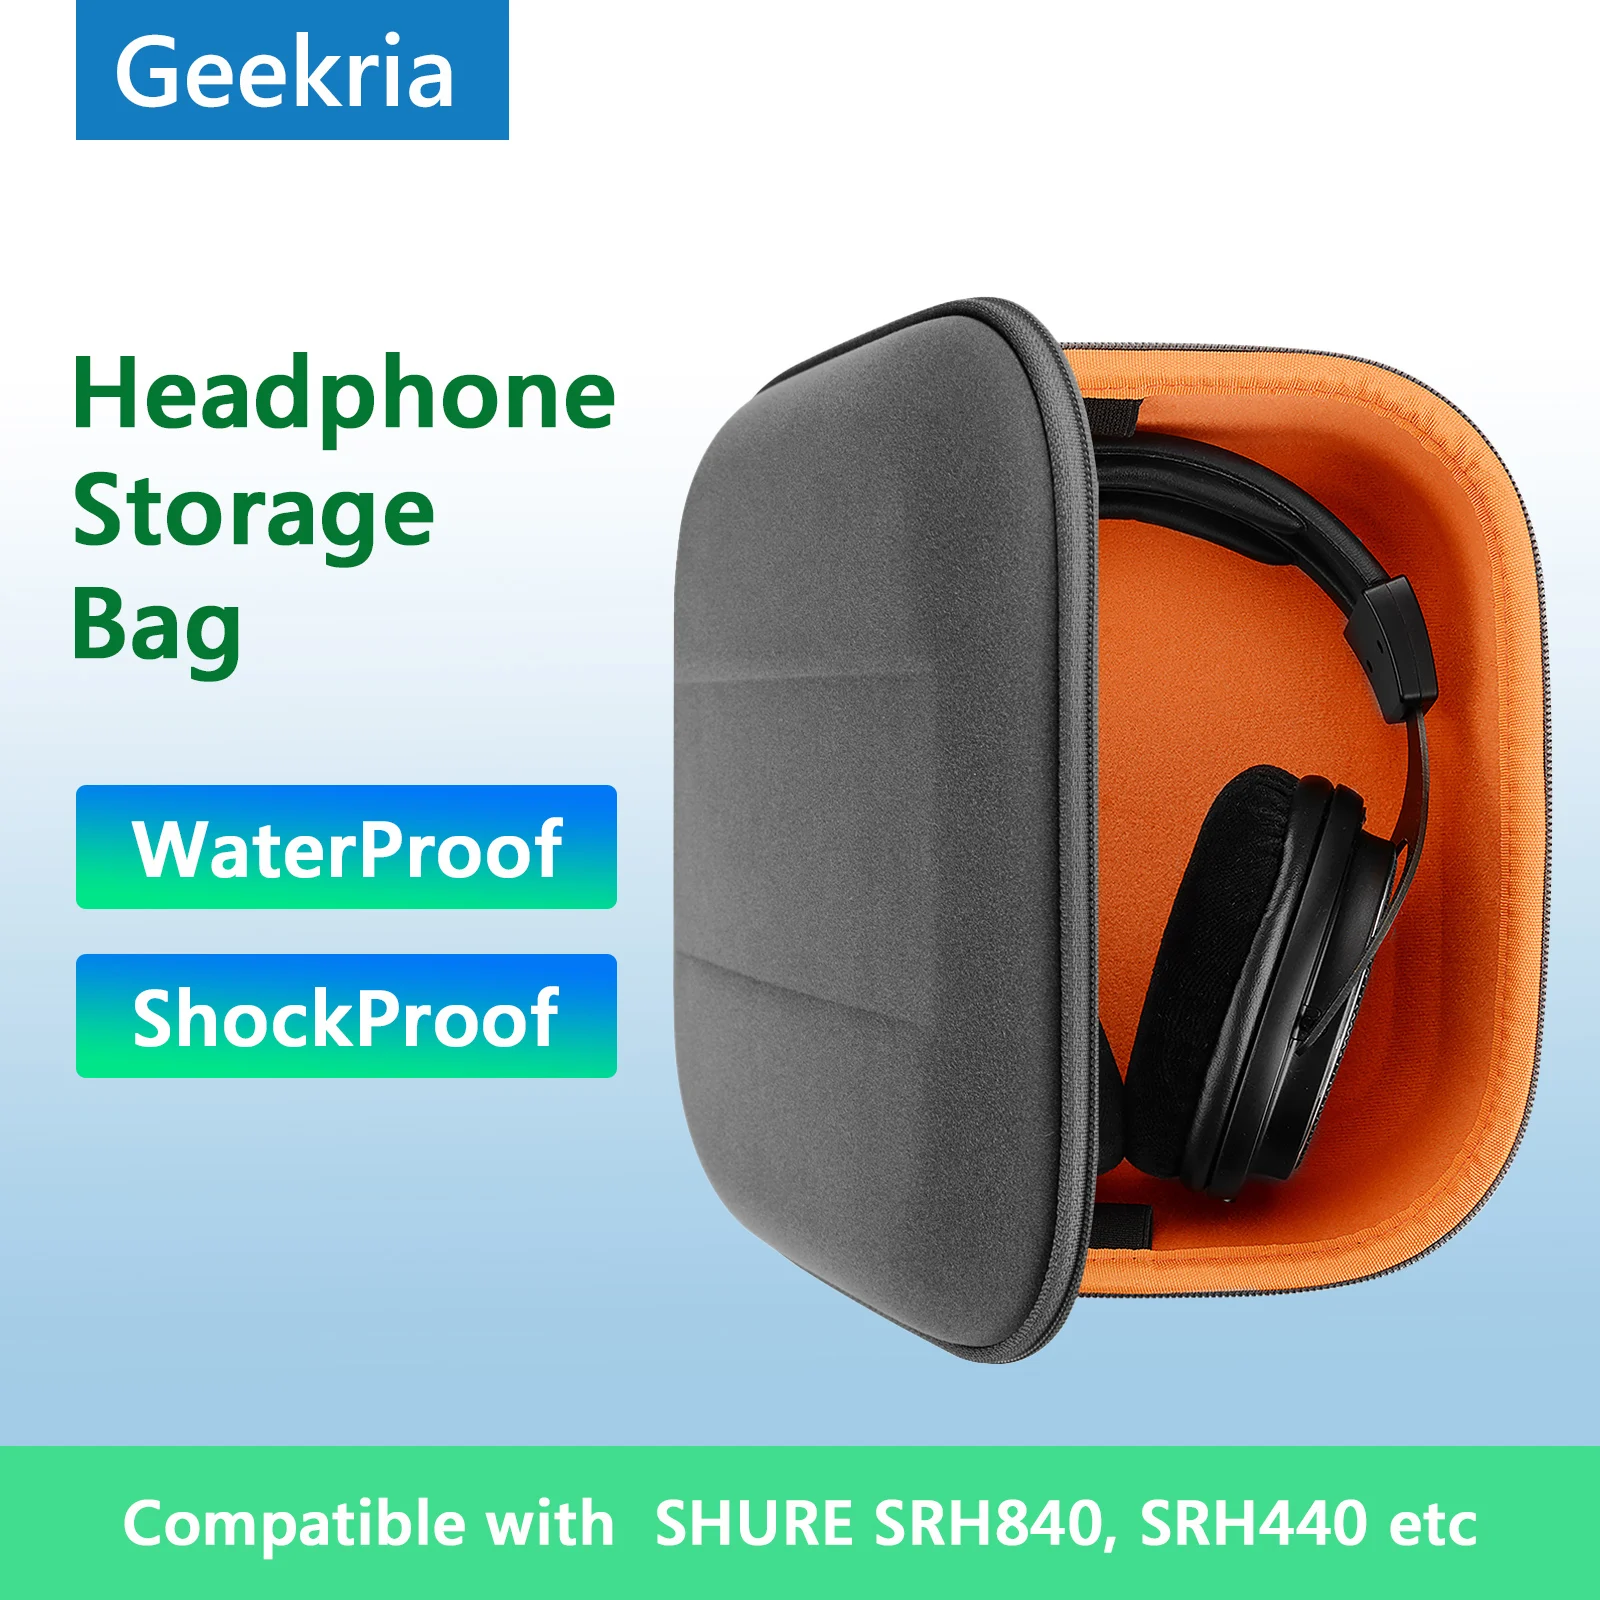 Geekria Headphones Case For Large-Sized Over Ear, For SHURE SRH840 SRH440, Portable Bluetooth Earphones Headset Bag For Storage enlarge